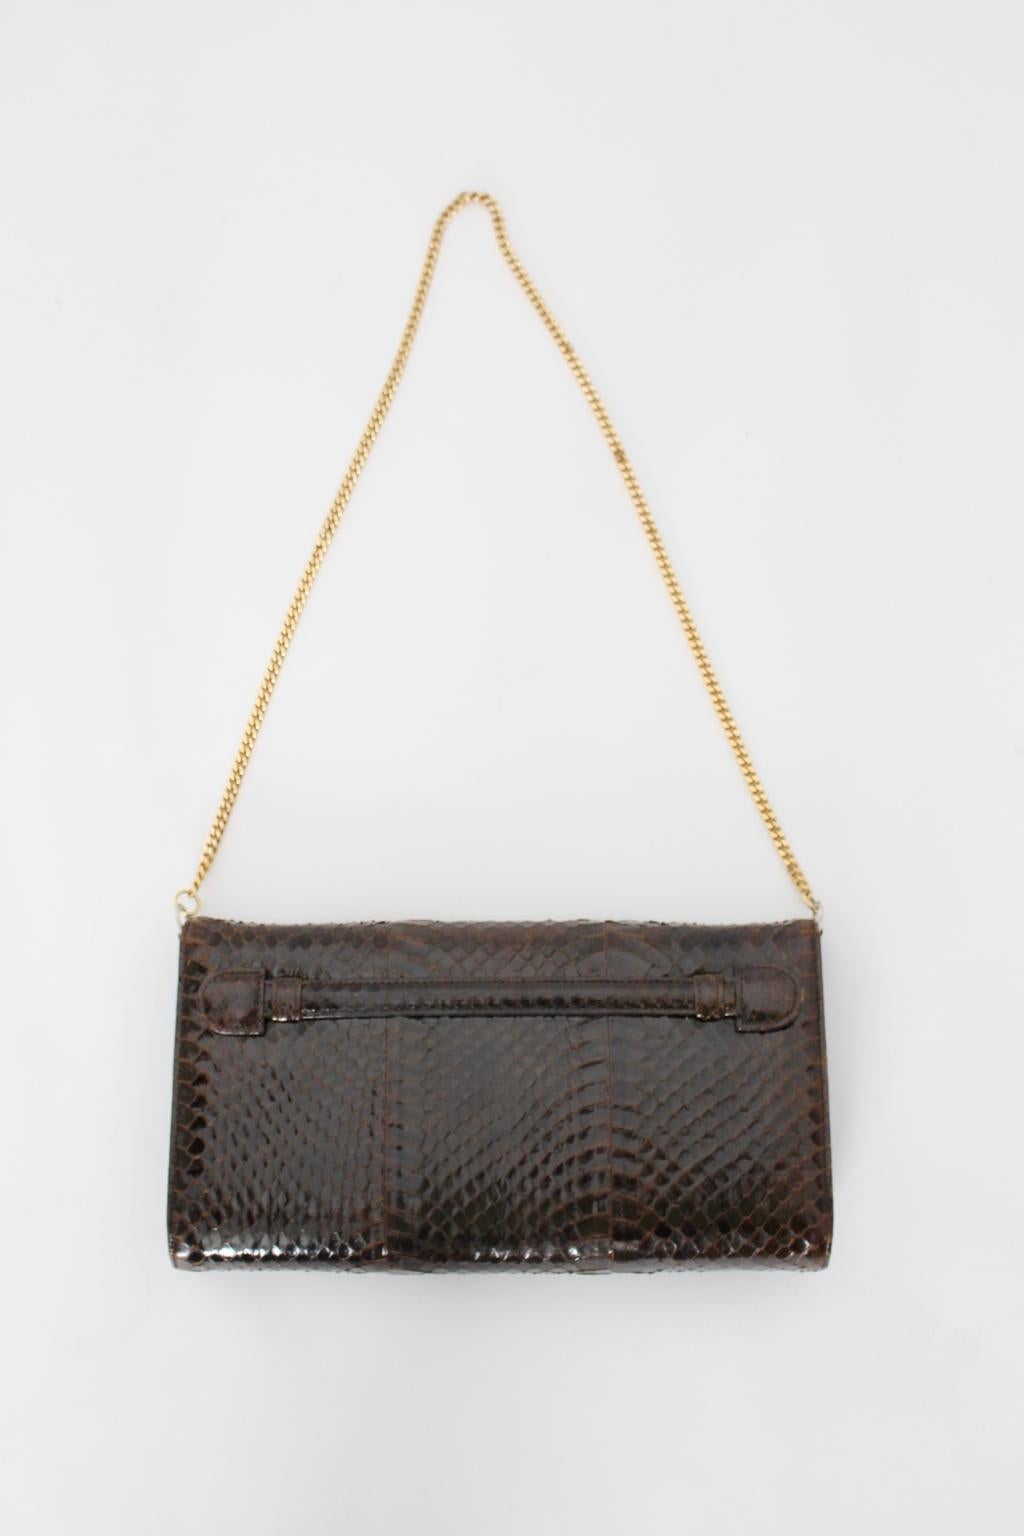 This presented high-quality chocolate brown snake skin handbag shows a golden brass chain and also fittings made of brass. 
The linen was made of brown suede leather and has an inside pocket. For closing the brown handbag it features a pressure